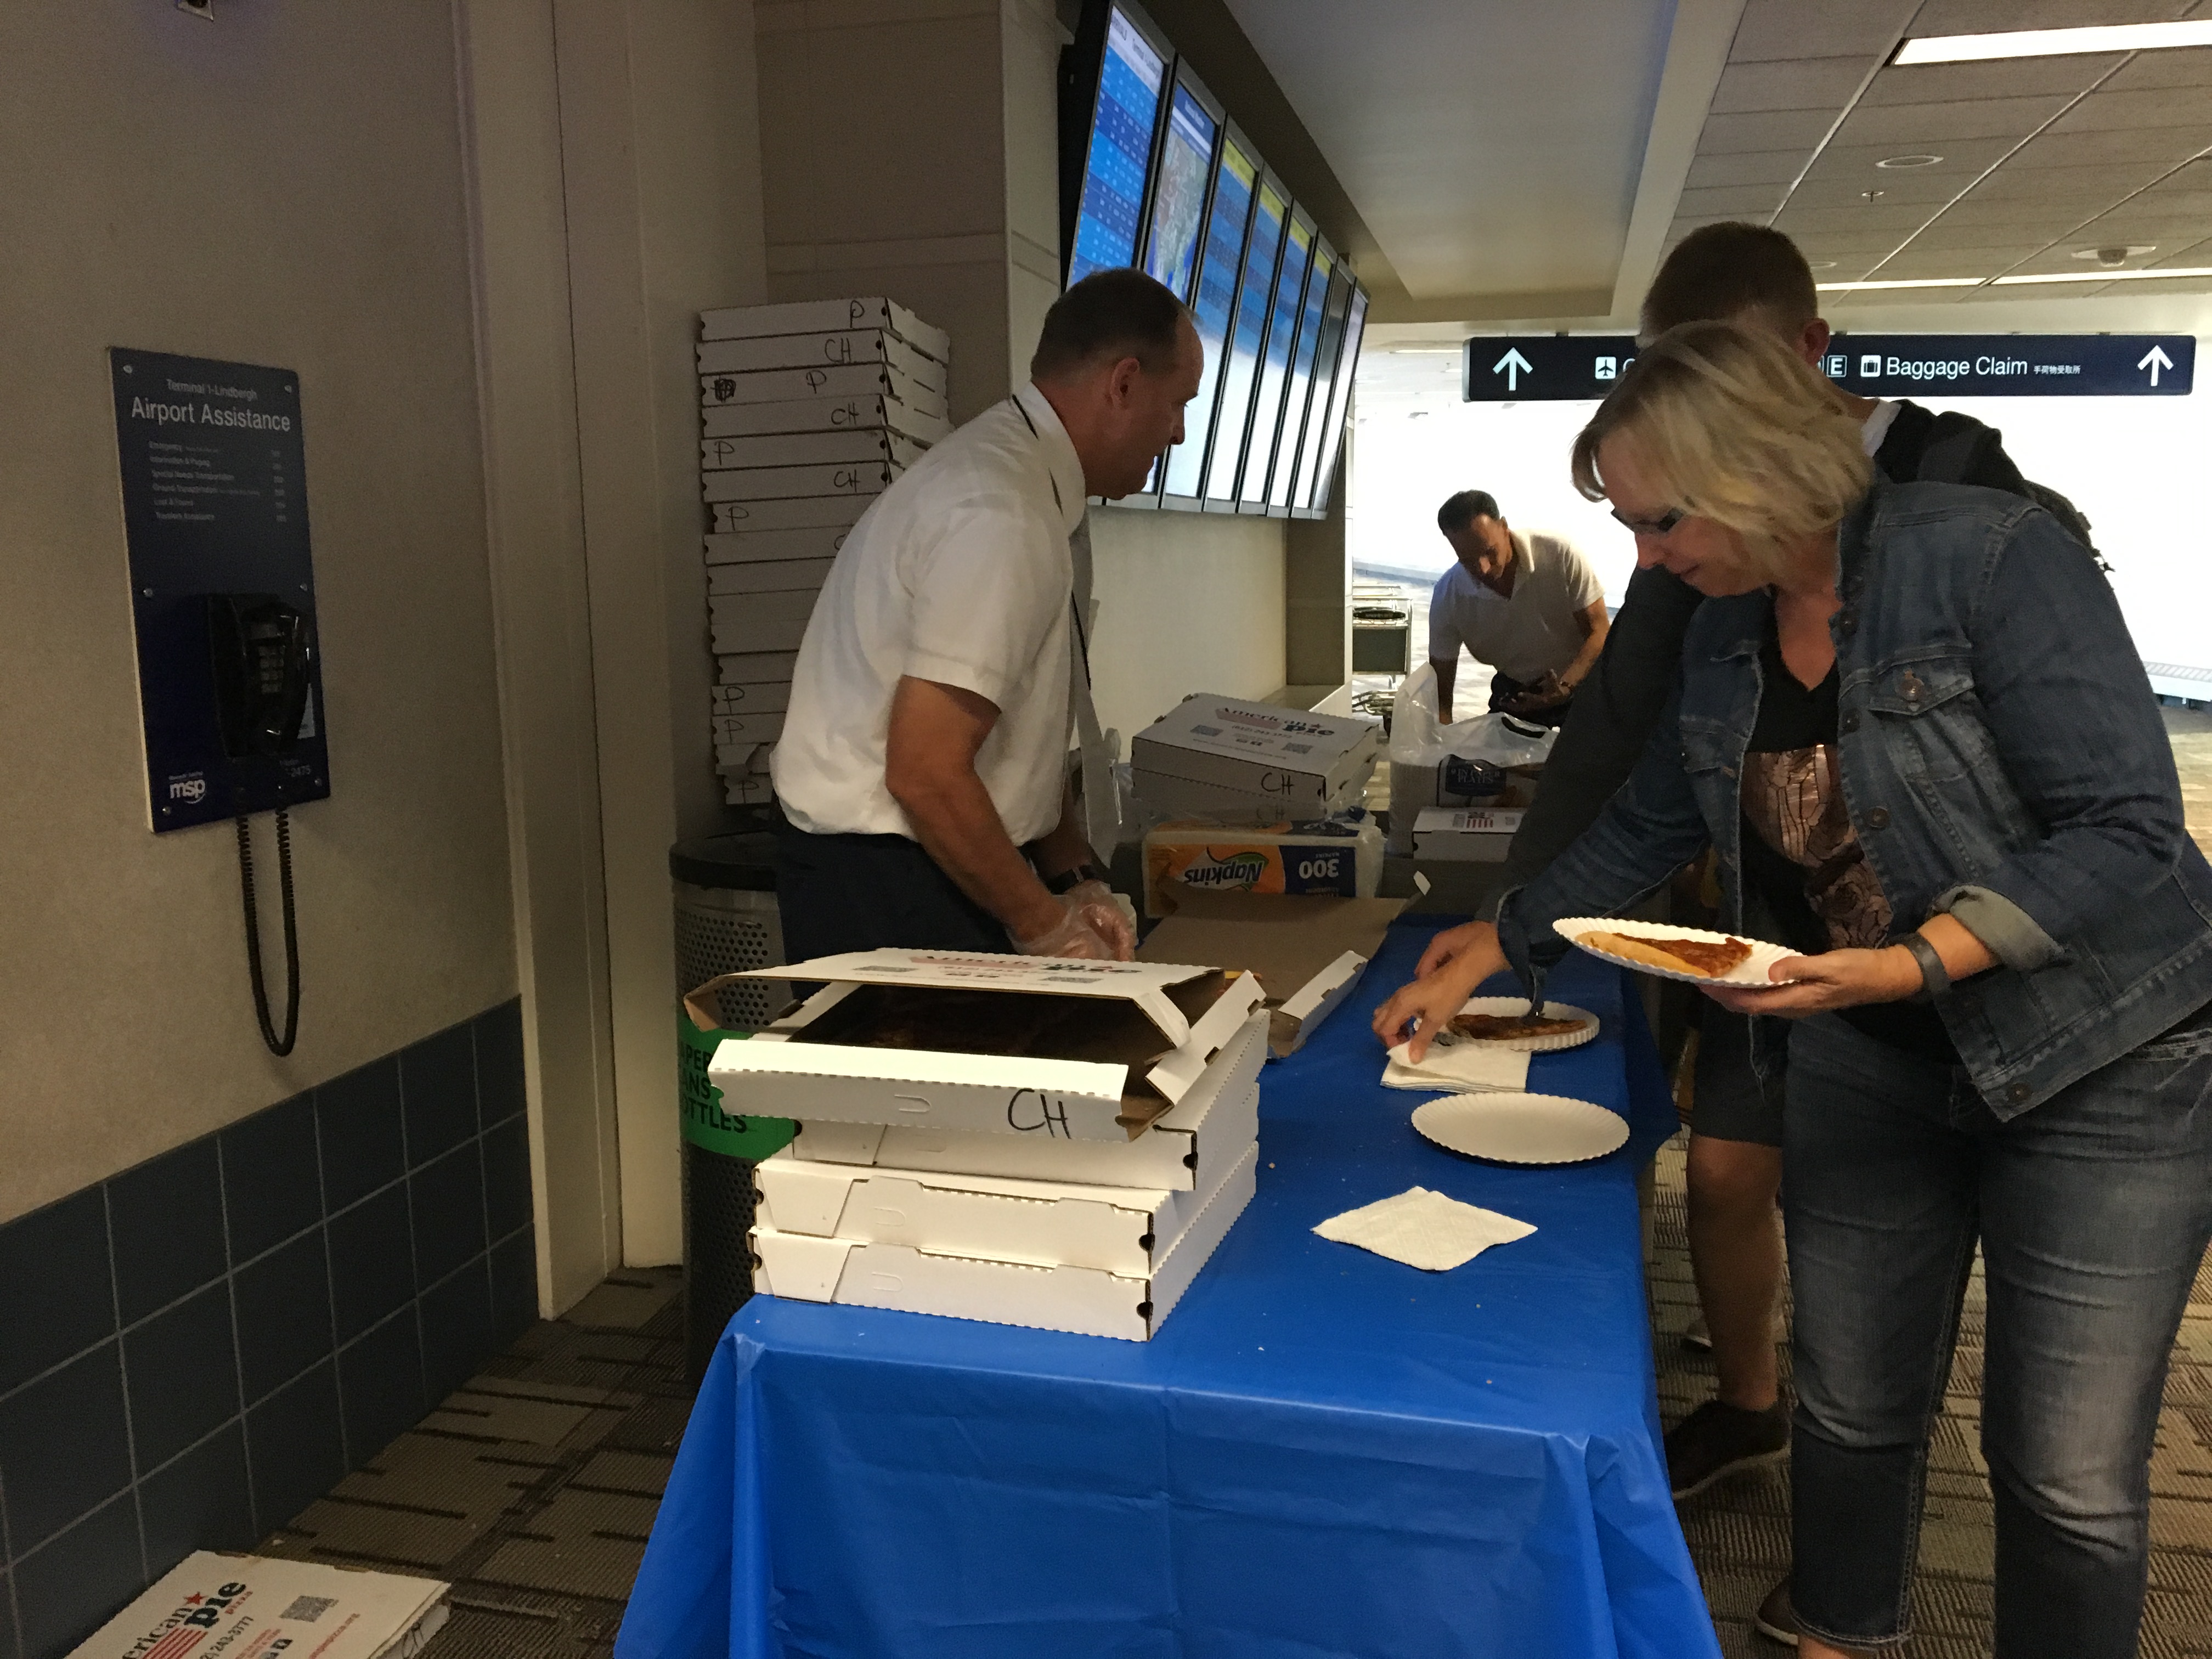 Delta passengers in Minneapolis get free pizza on Monday afternoon. (Photo by Annie Feidt, Alaska's Energy Desk - Anchorage)